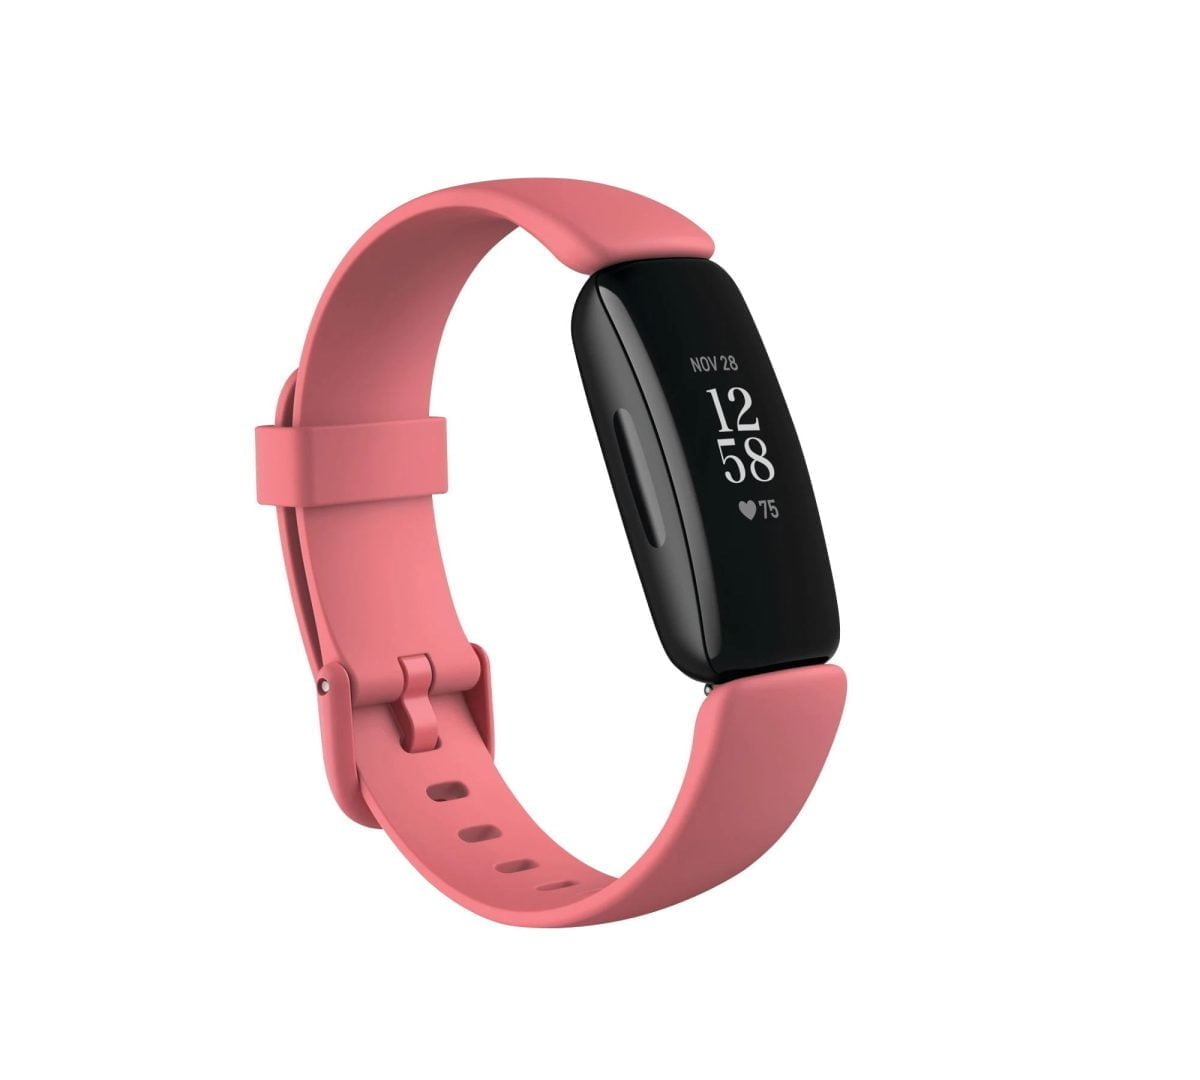 6425997 Rd Fitbit &Amp;Lt;Div Class=&Amp;Quot;Long-Description-Container Body-Copy &Amp;Quot;&Amp;Gt; &Amp;Lt;Div Class=&Amp;Quot;Html-Fragment&Amp;Quot;&Amp;Gt; &Amp;Lt;Div&Amp;Gt; &Amp;Lt;Div&Amp;Gt; &Amp;Lt;H1&Amp;Gt;Fitbit Inspire 2 Fitness Tracker - Desert Rose&Amp;Lt;/H1&Amp;Gt; &Amp;Lt;/Div&Amp;Gt; &Amp;Lt;Div&Amp;Gt;Make Healthy A Habit With Fitbit Inspire 2.  This Easy-To-Use Fitness Tracker Packs 24/7 Heart Rate, Active Zone Minutes, Activity And Sleep Tracking, Up To 10 Days Of Battery And More--Paired With Step-By-Step Fitness &Amp;Amp; Nutrition Programs, Personalized Insights, And Sleep Tools From Premium, You Have All You Need For A Healthier You.&Amp;Lt;/Div&Amp;Gt; &Amp;Lt;/Div&Amp;Gt; &Amp;Lt;/Div&Amp;Gt; &Amp;Lt;/Div&Amp;Gt; Fitbit Inspire 2 Fitbit Inspire 2 Fitness Tracker - Desert Rose